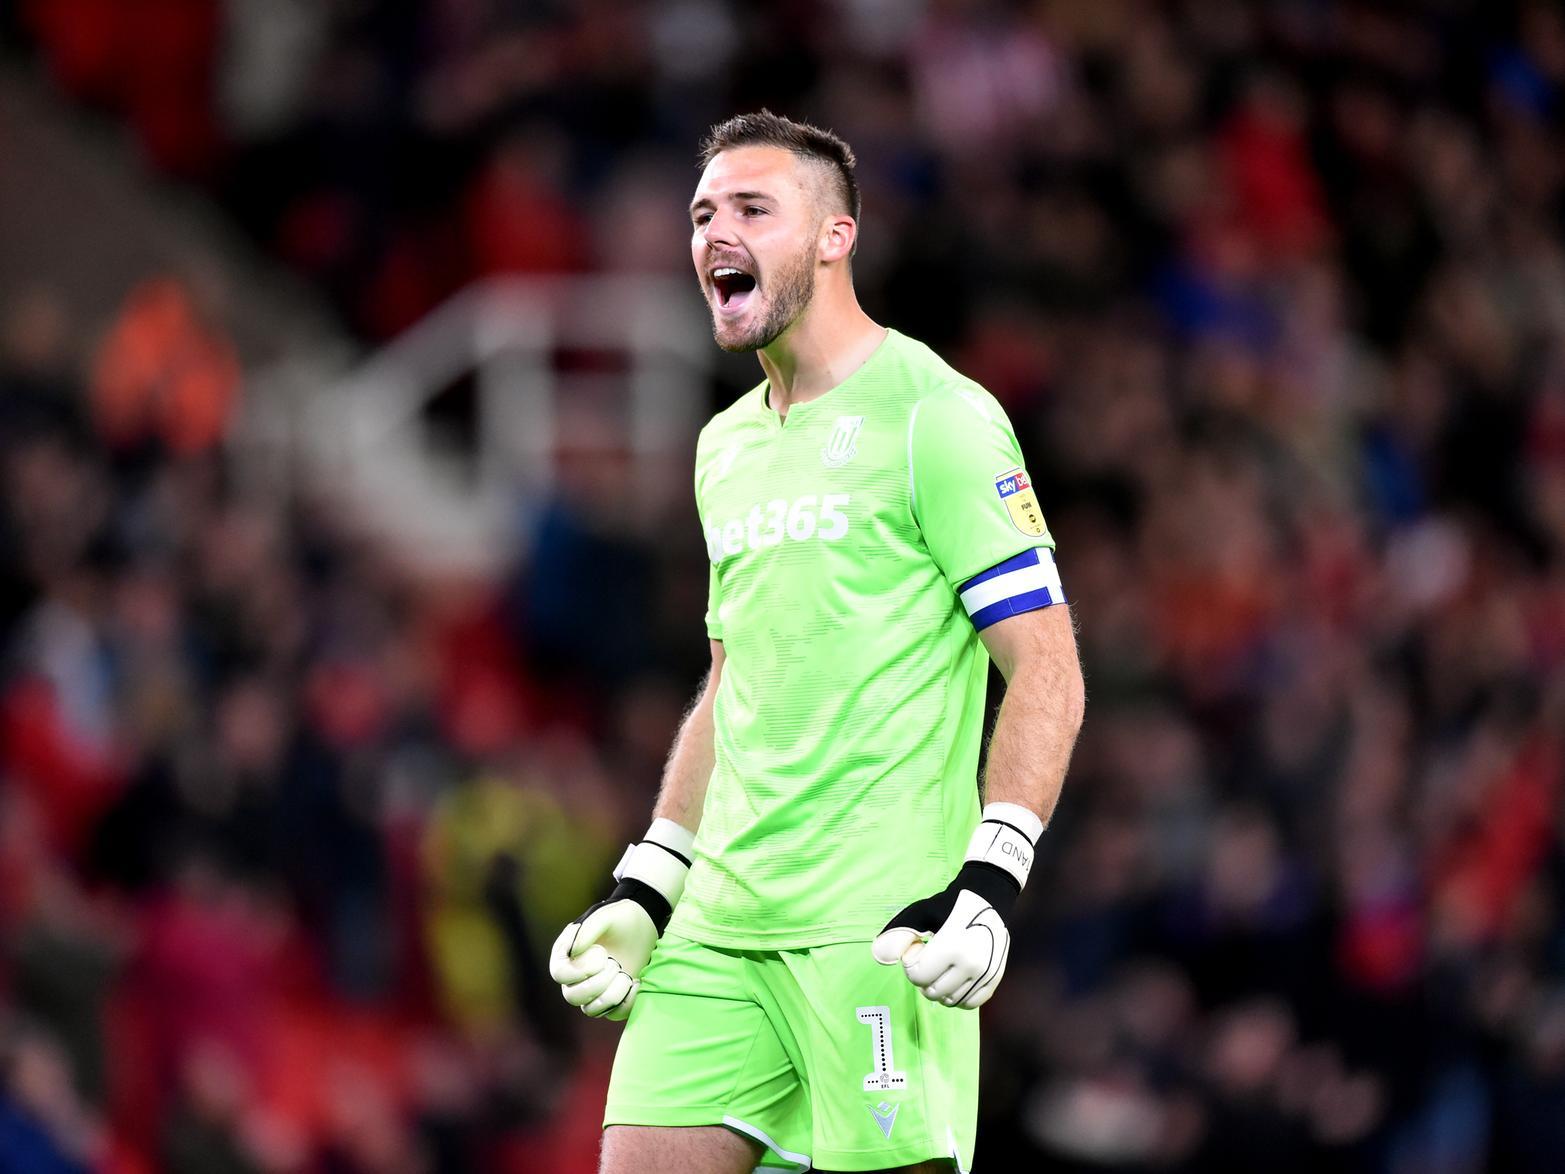 Newcastle United are 3/1 favourites to sign Stoke City goalkeeper Jack Butland in January, but face competition from the likes of Leicester City and Aston Villa. (Sky Bet)